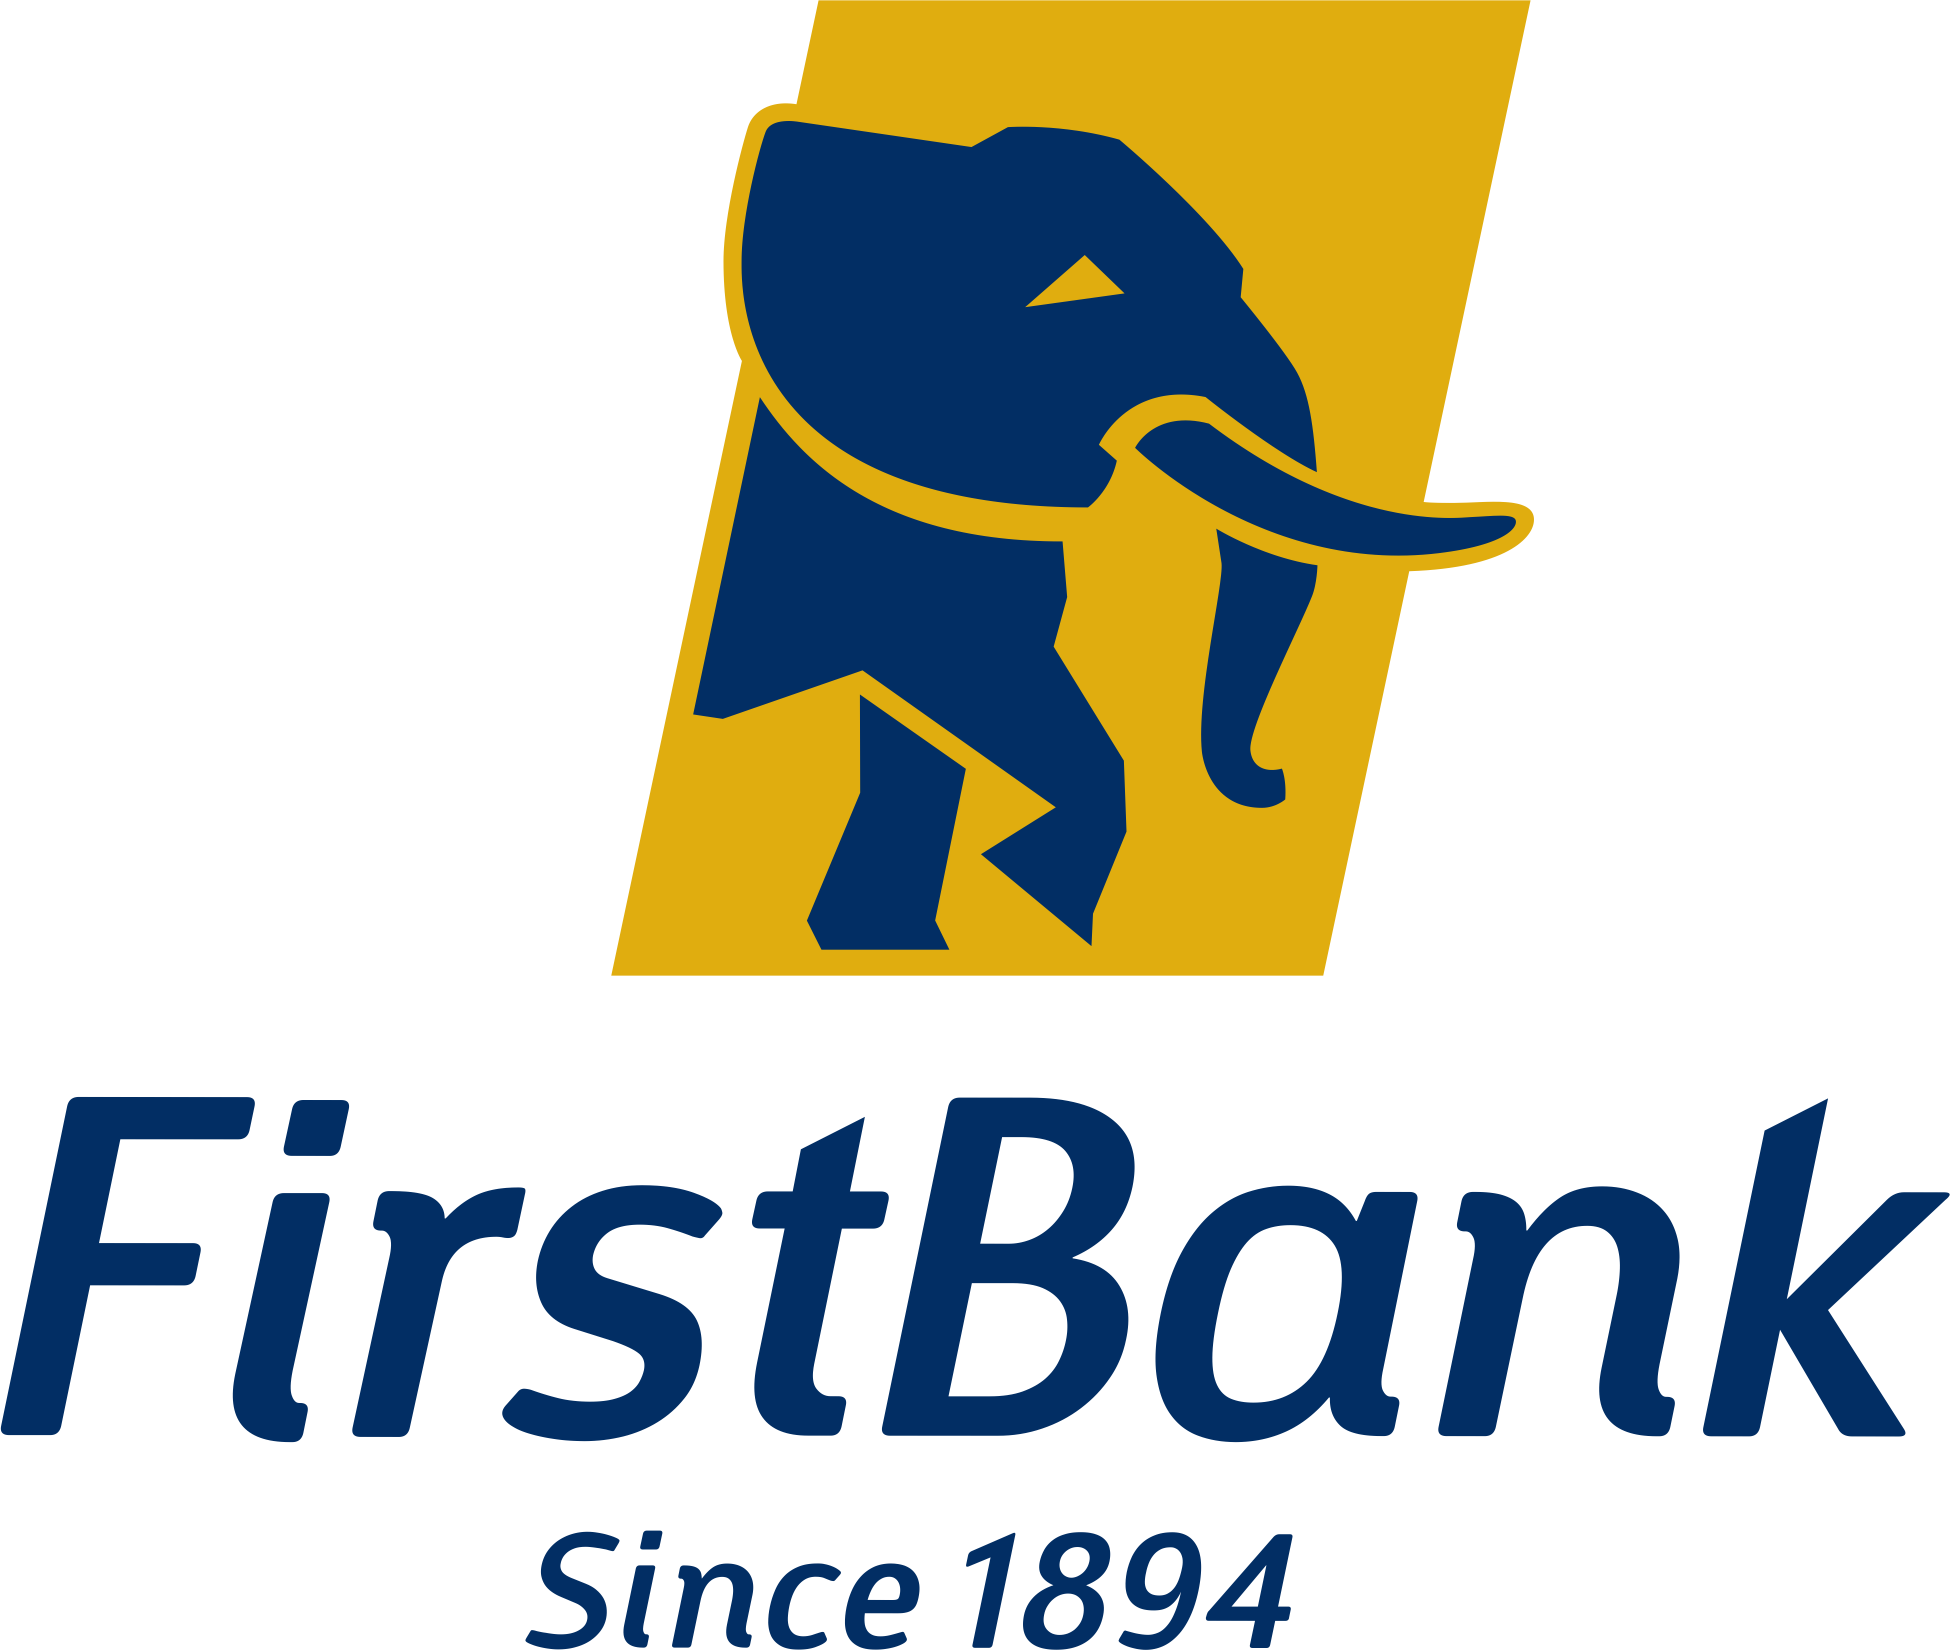 FirstBank Celebrates 2021 Corporate Responsibility and Sustainability Week, Calls for All to Adopt Kindness as a Way of Life.